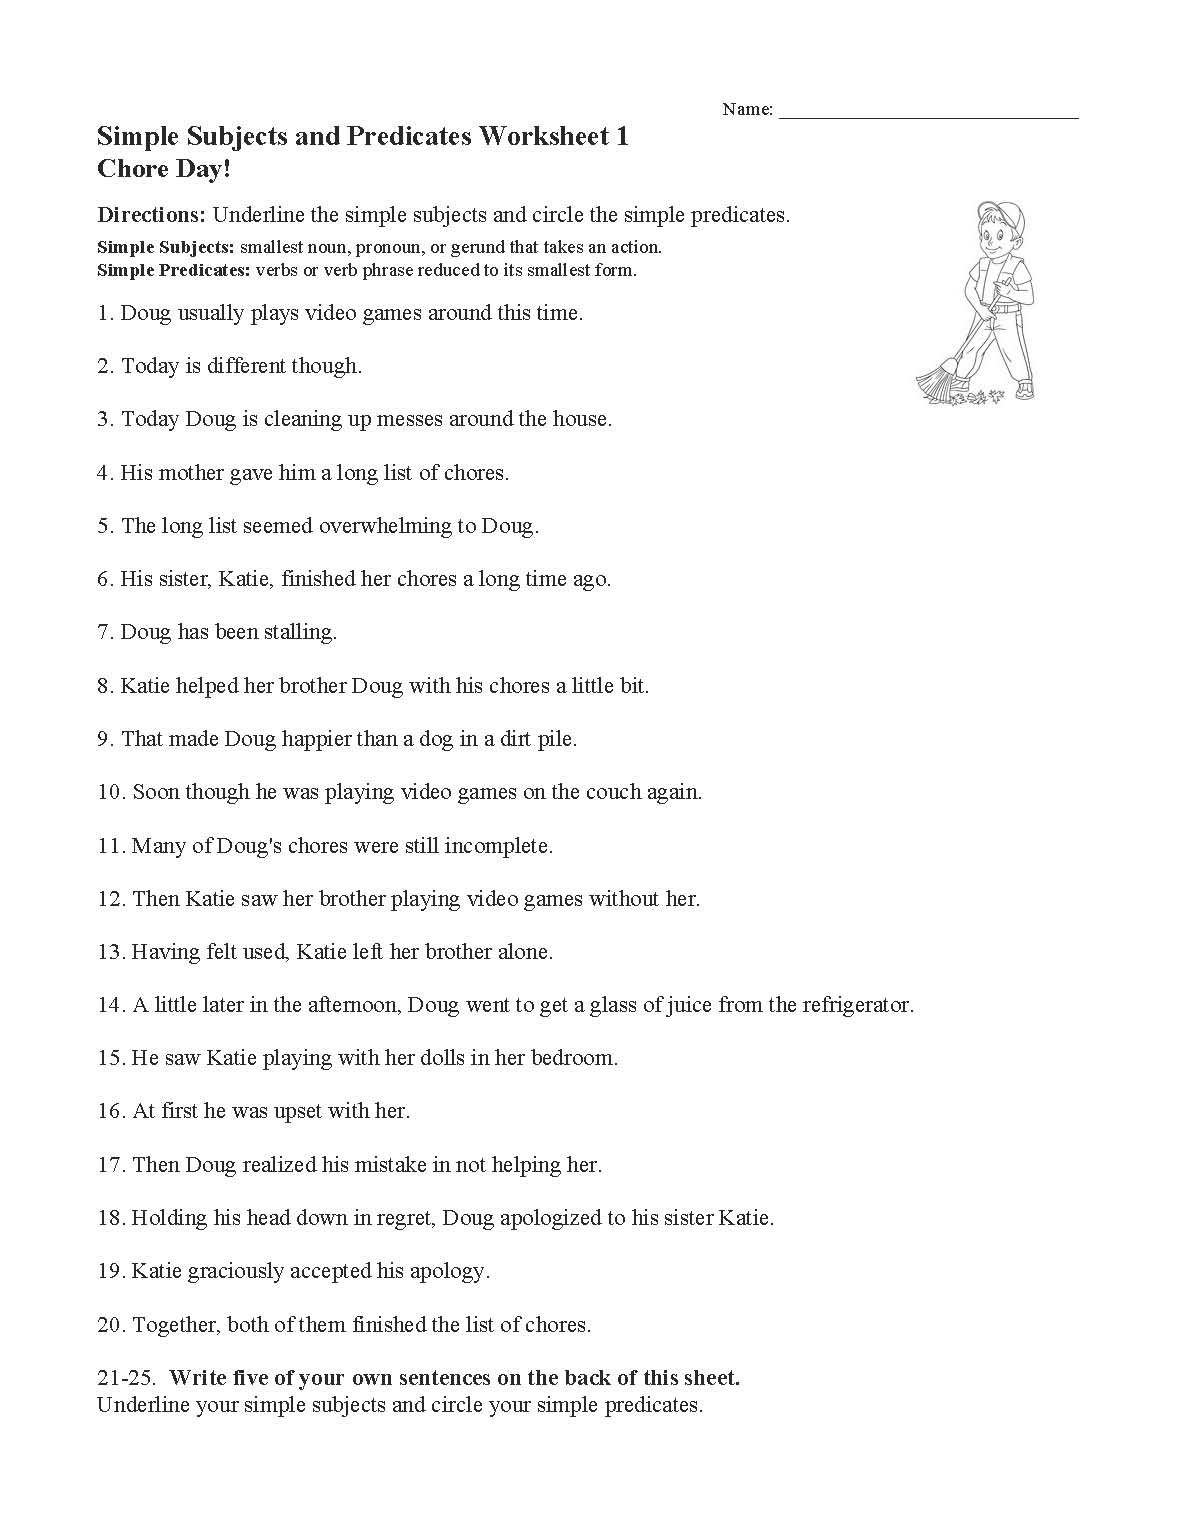 simple-subjects-and-predicates-worksheet-1-preview